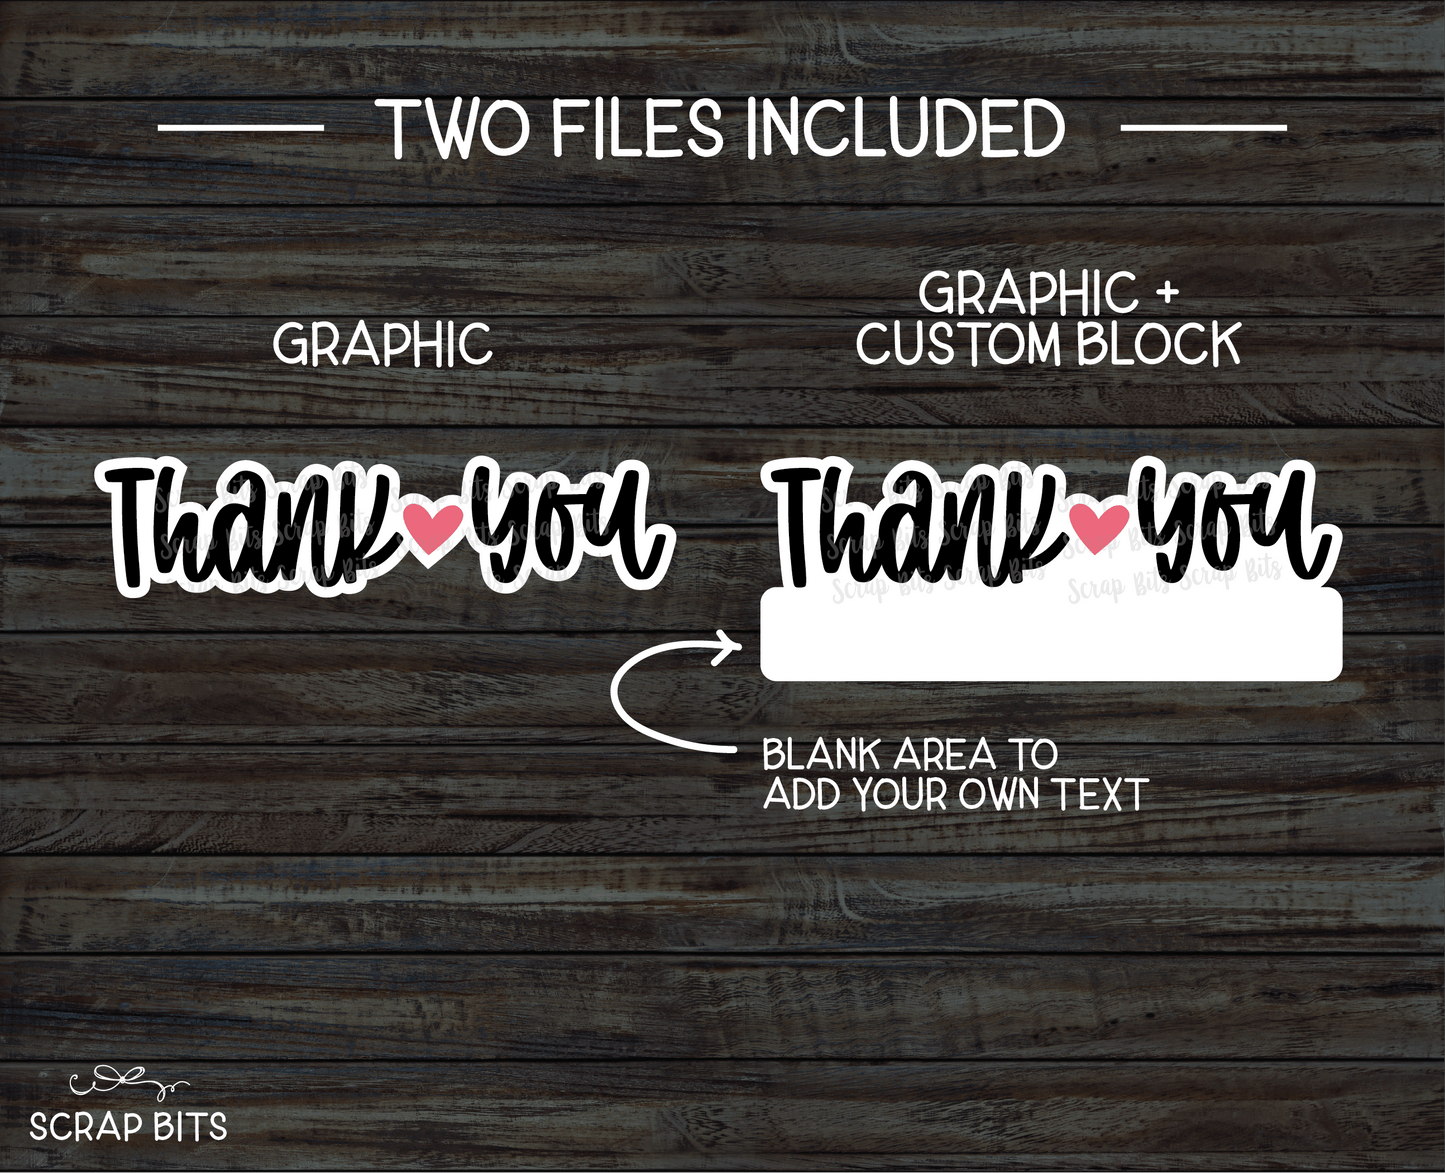 Thank You Digital Sticker, Pink Heart Small Business Packaging Stickers . 2 Digital Files, Instant Download - Scrap Bits